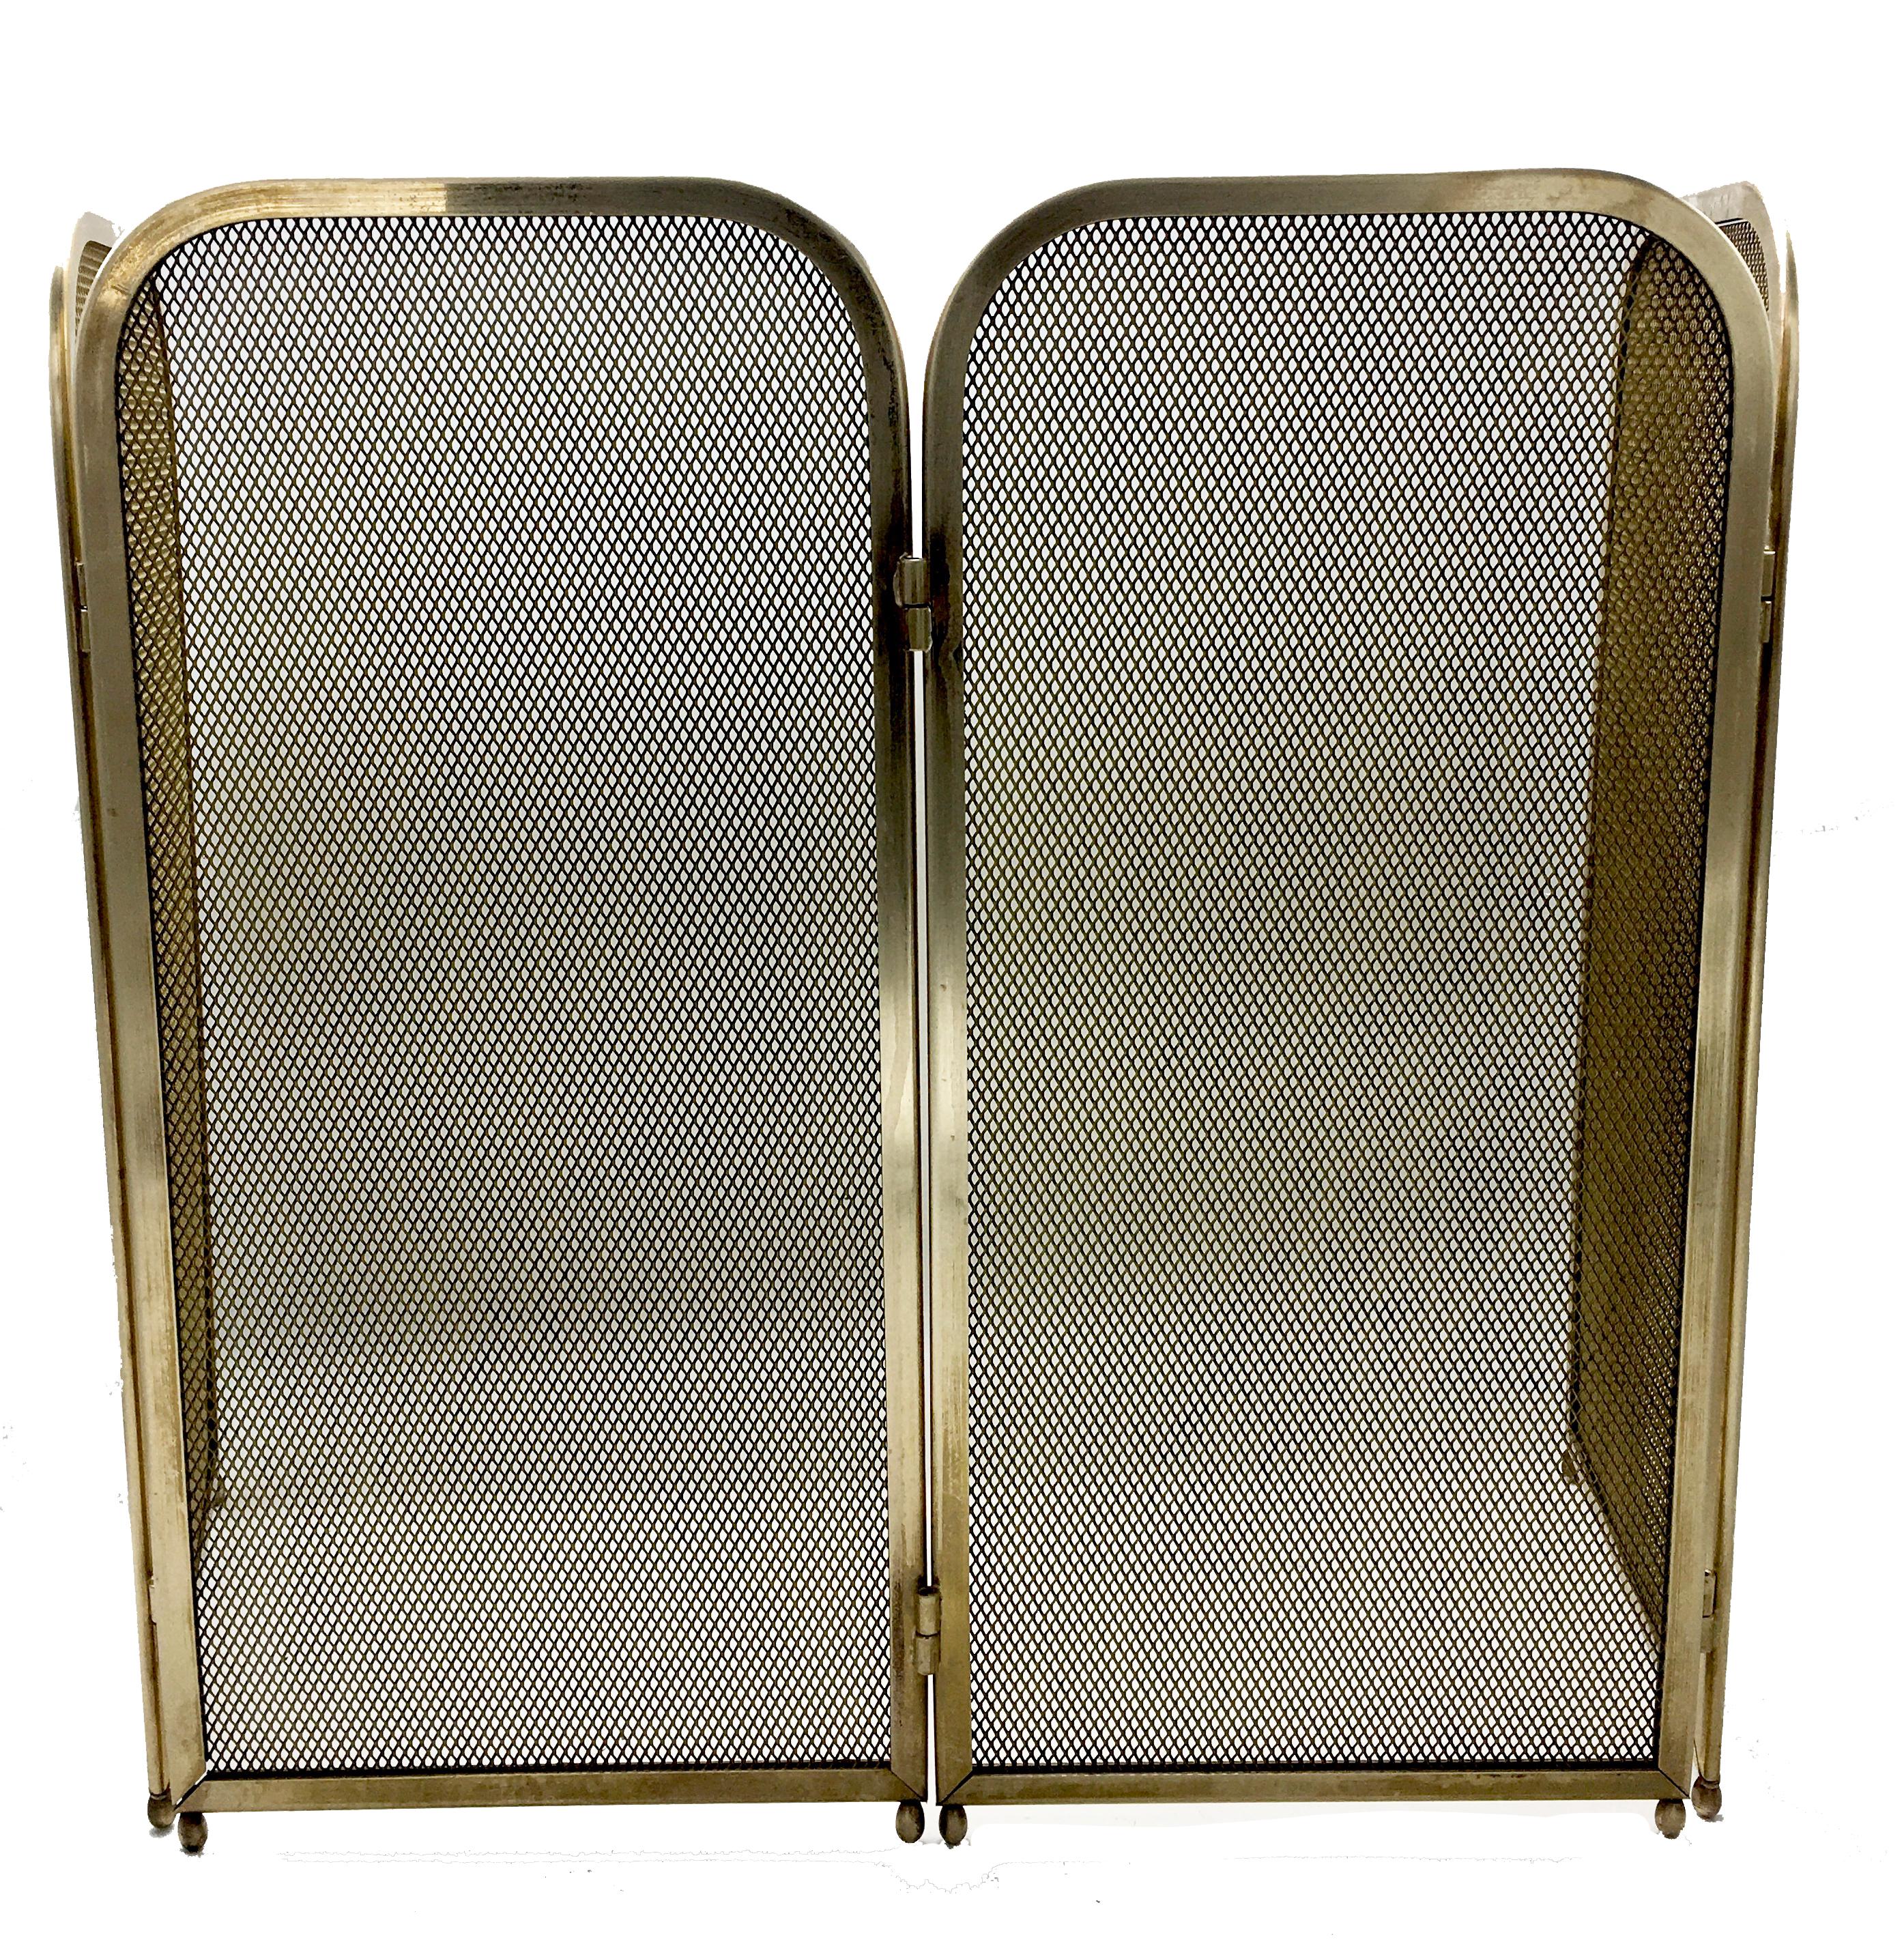 Solid brass fireplace screen with beautifully gilded, sleek 4-stroke shape, high model.
Beautiful sleek design.

Beautiful screen with hinged sides.
Beautiful patina.
The metal grille/braid is trimmed with a rounded brass edge all around.

The